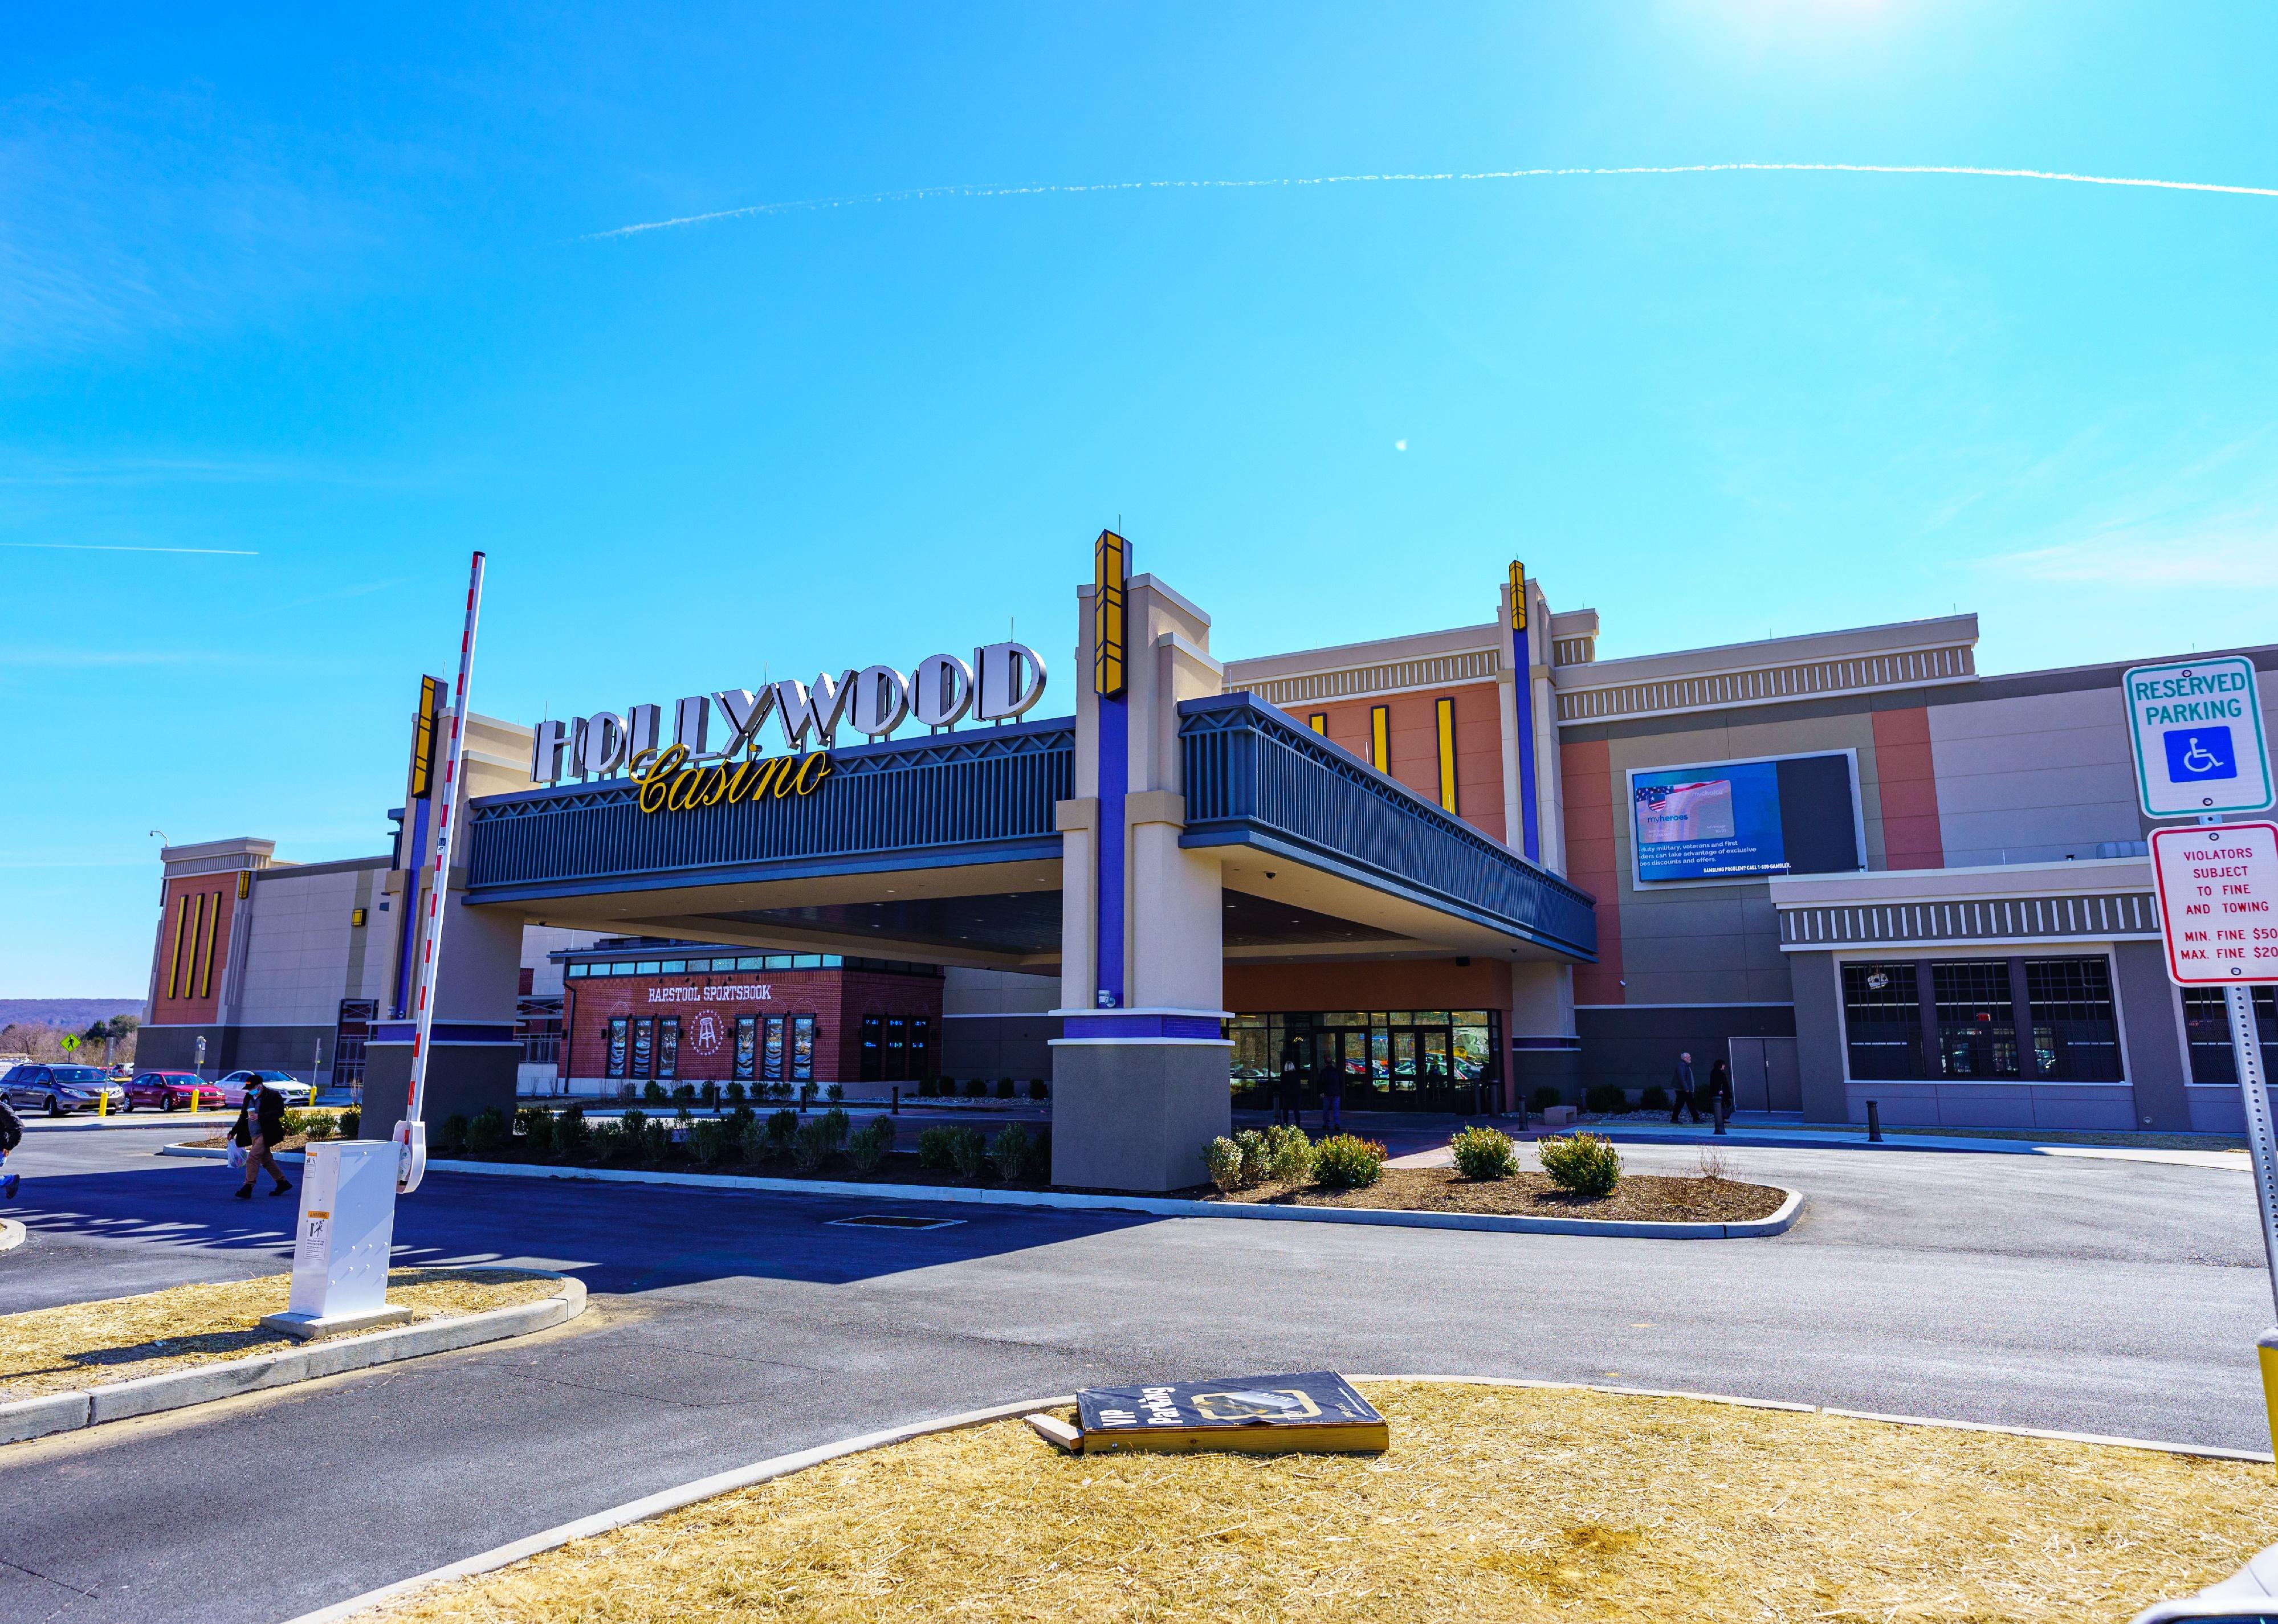 The exterior of the Hollywood Morgantown Casino.